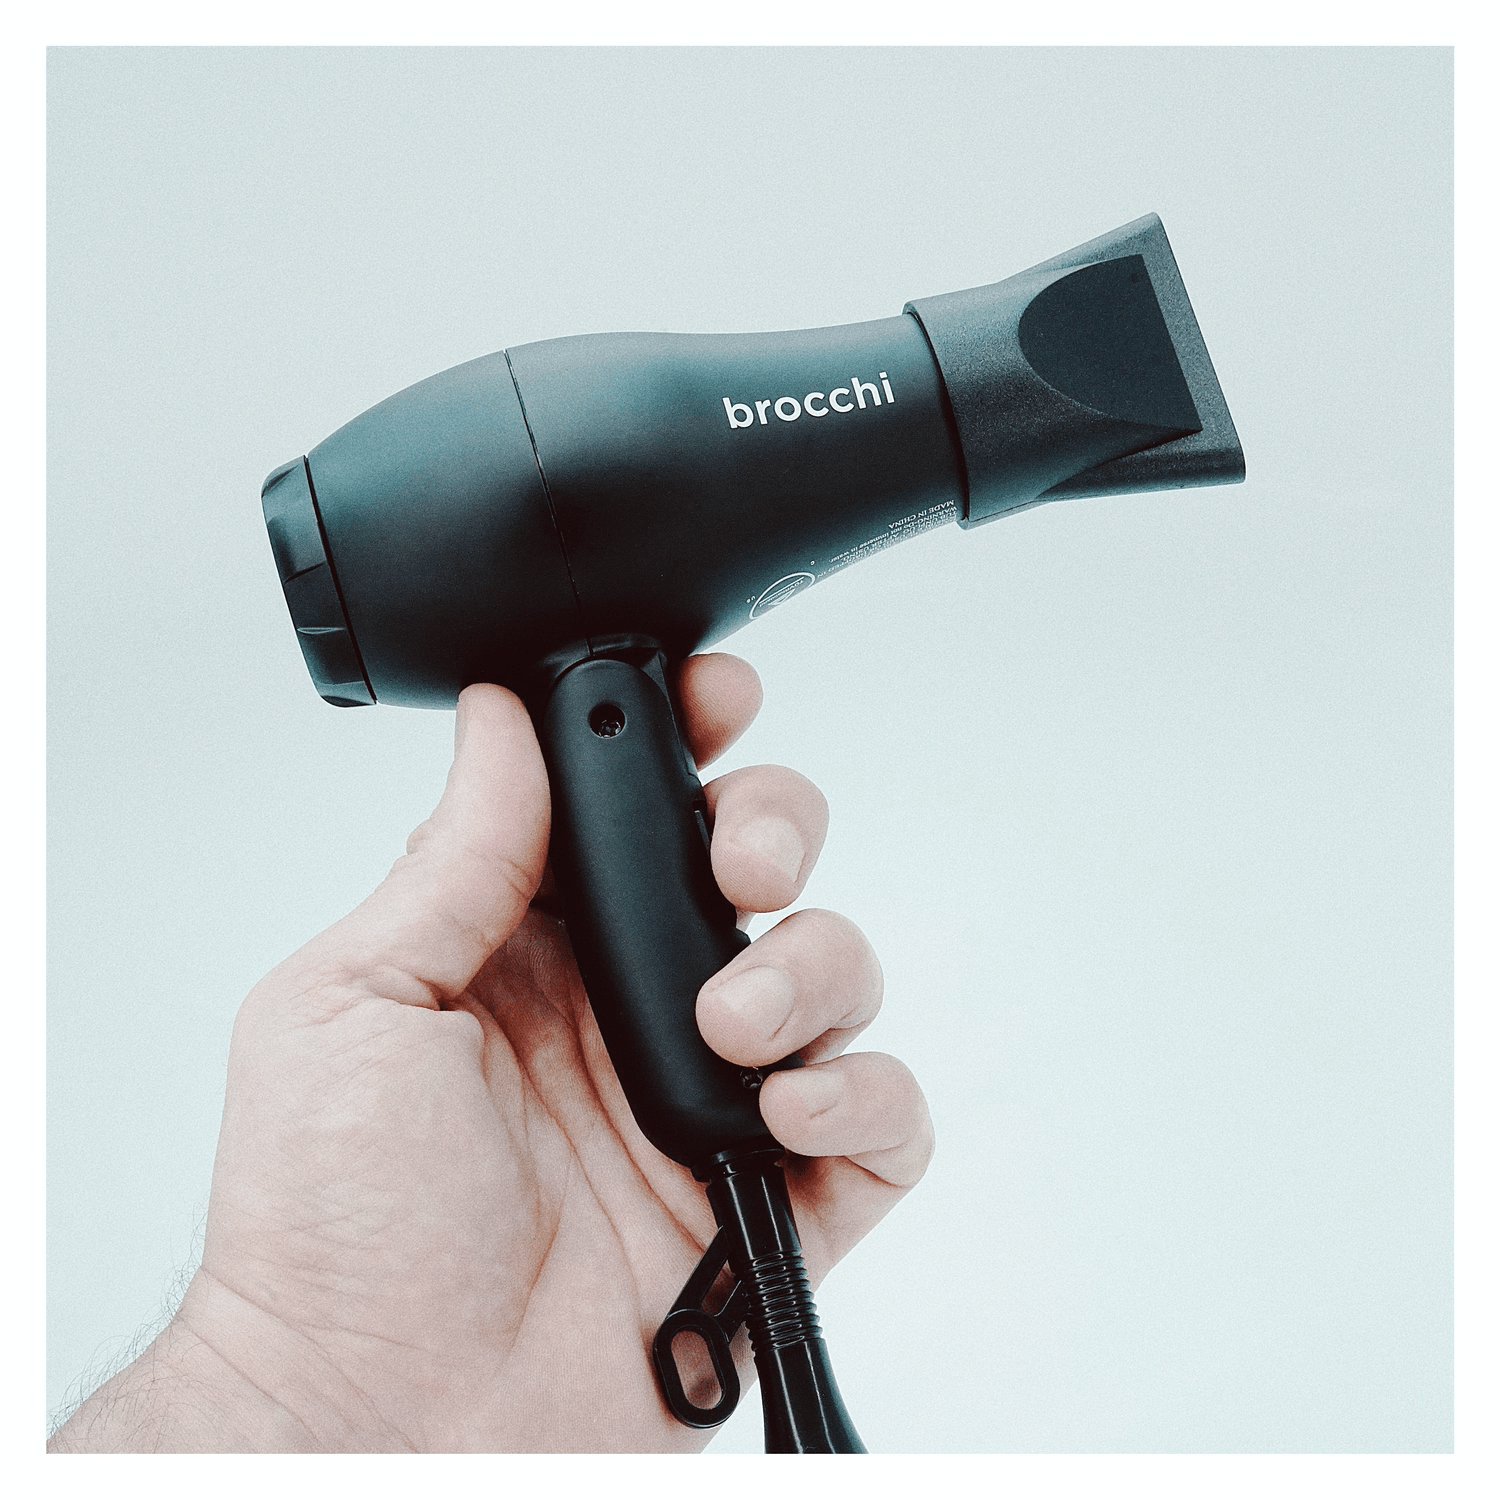 Hair Dryers For Men - How to Blow Dry Your Hair - The Lifestyle Blog for  Modern Men & their Hair by Curly Rogelio